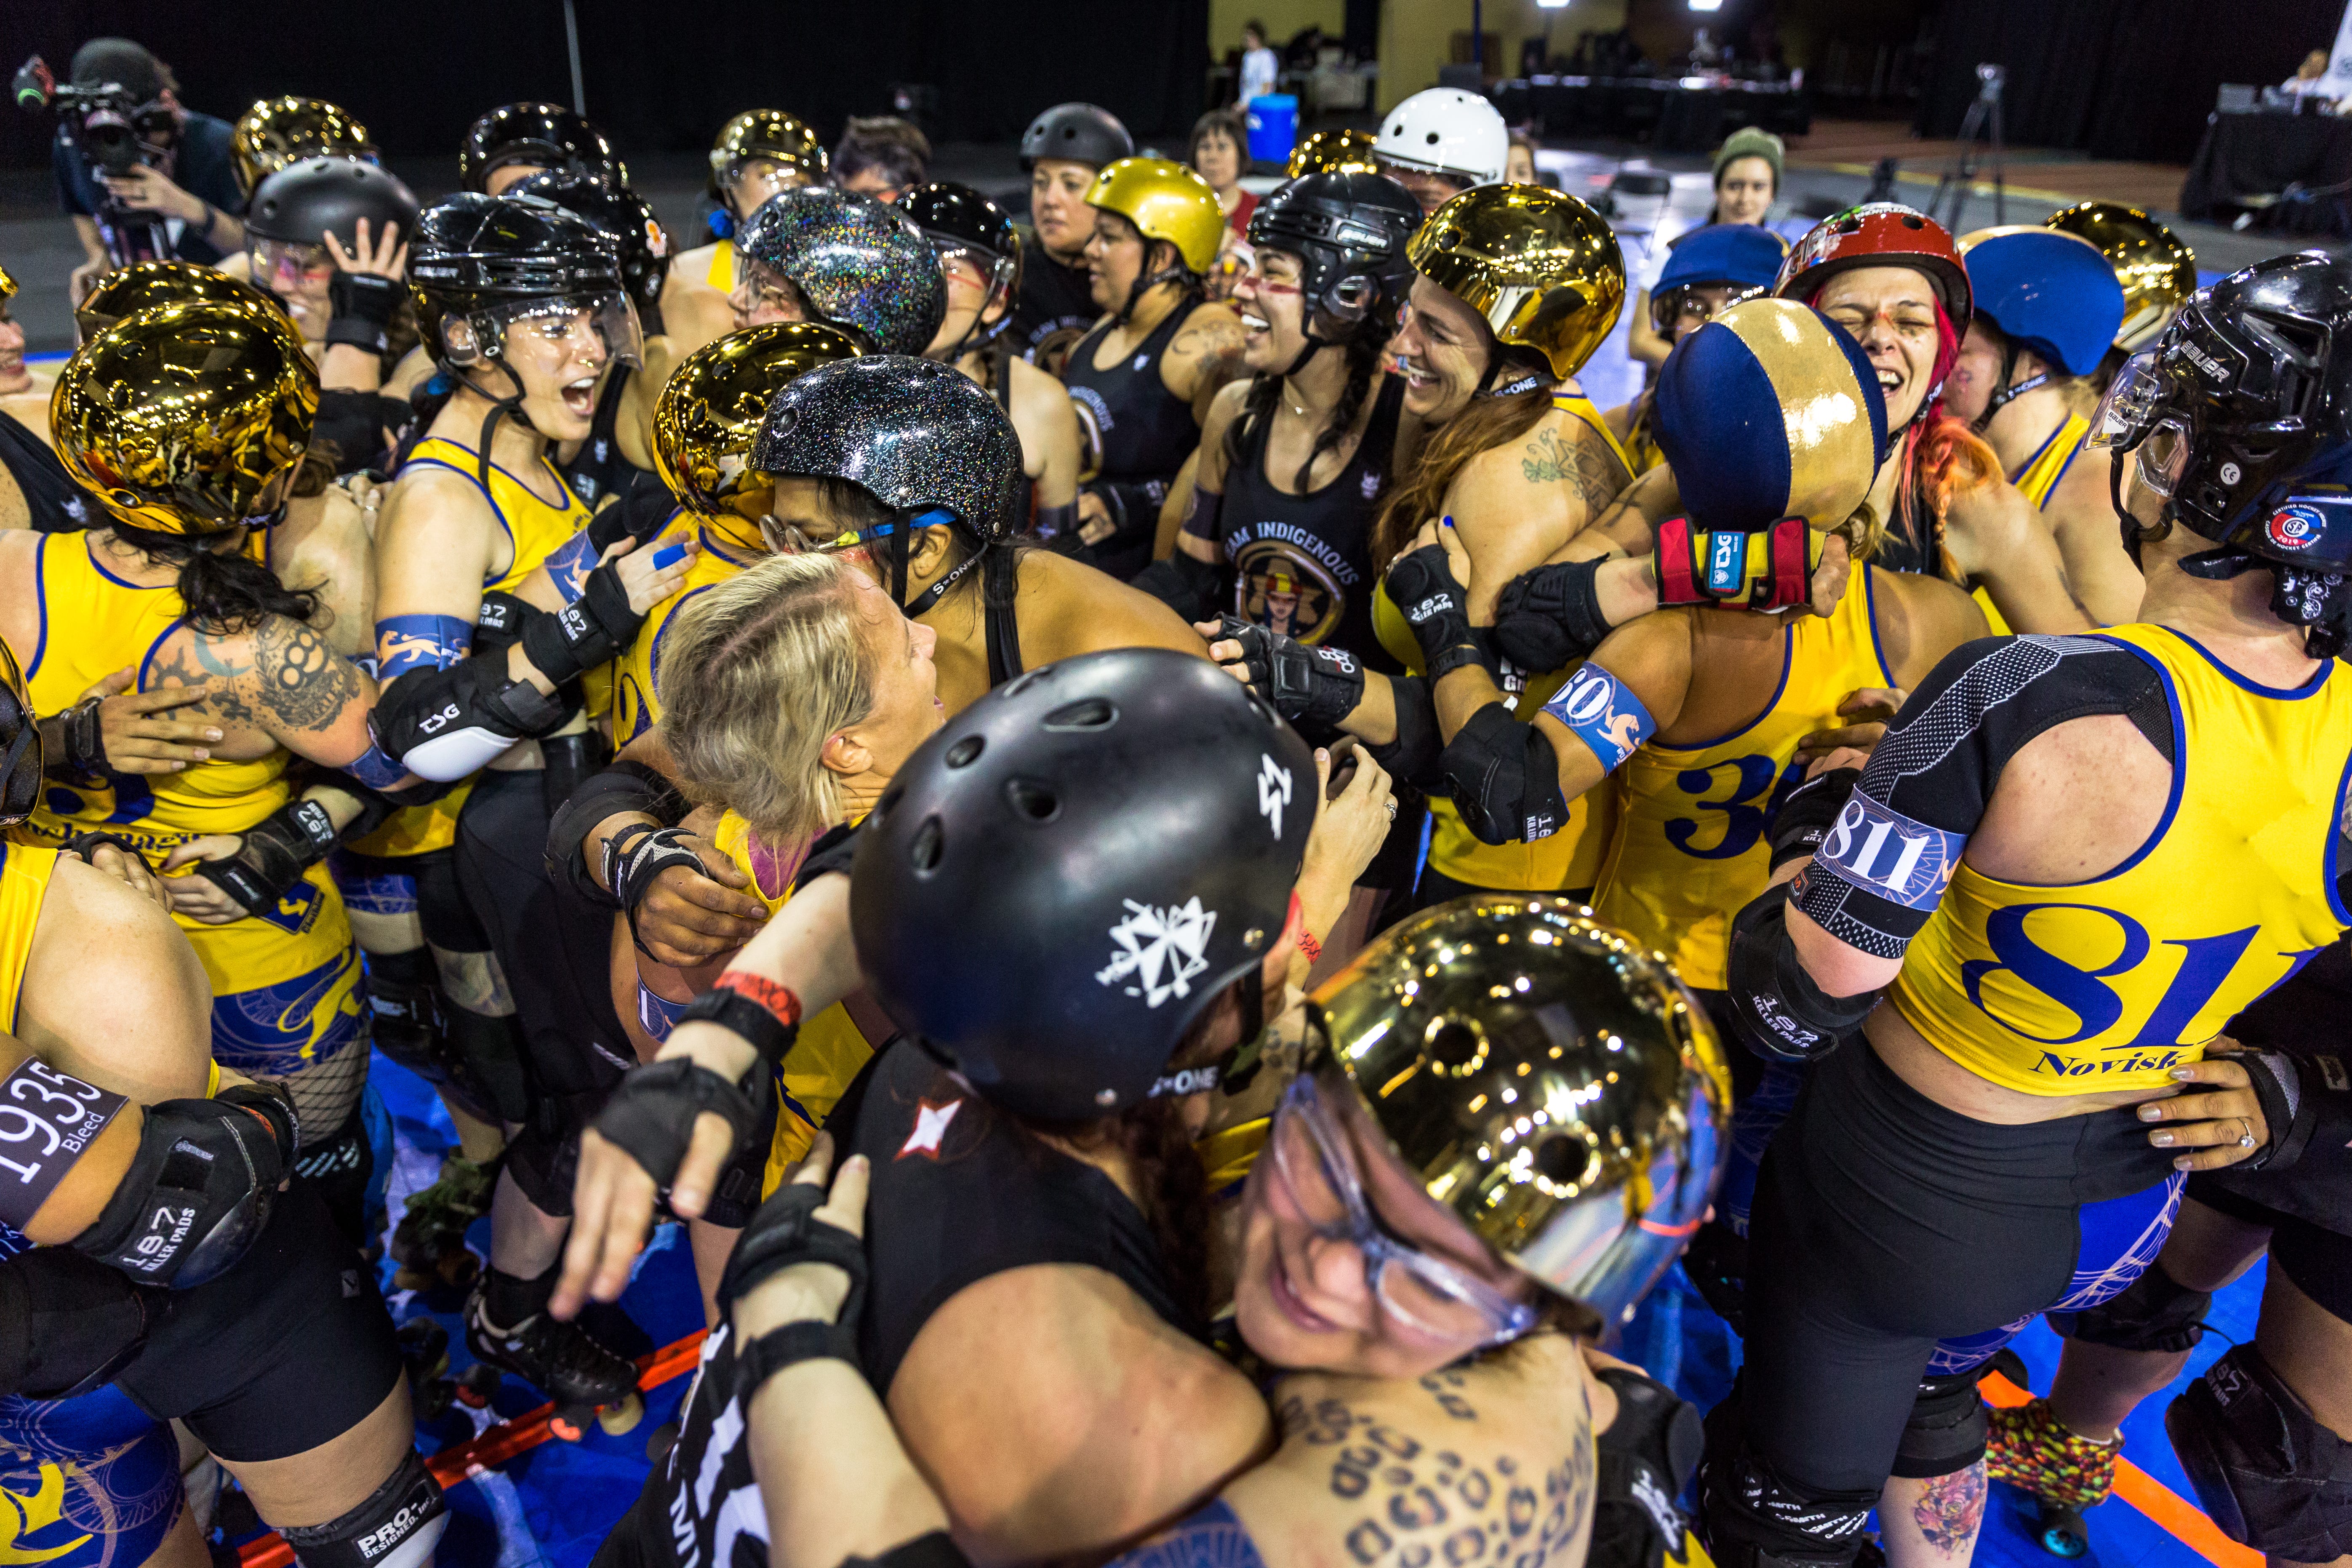 Game Without Borders Reconnecting Through Roller Derby by Barry Dredze The Apex photo